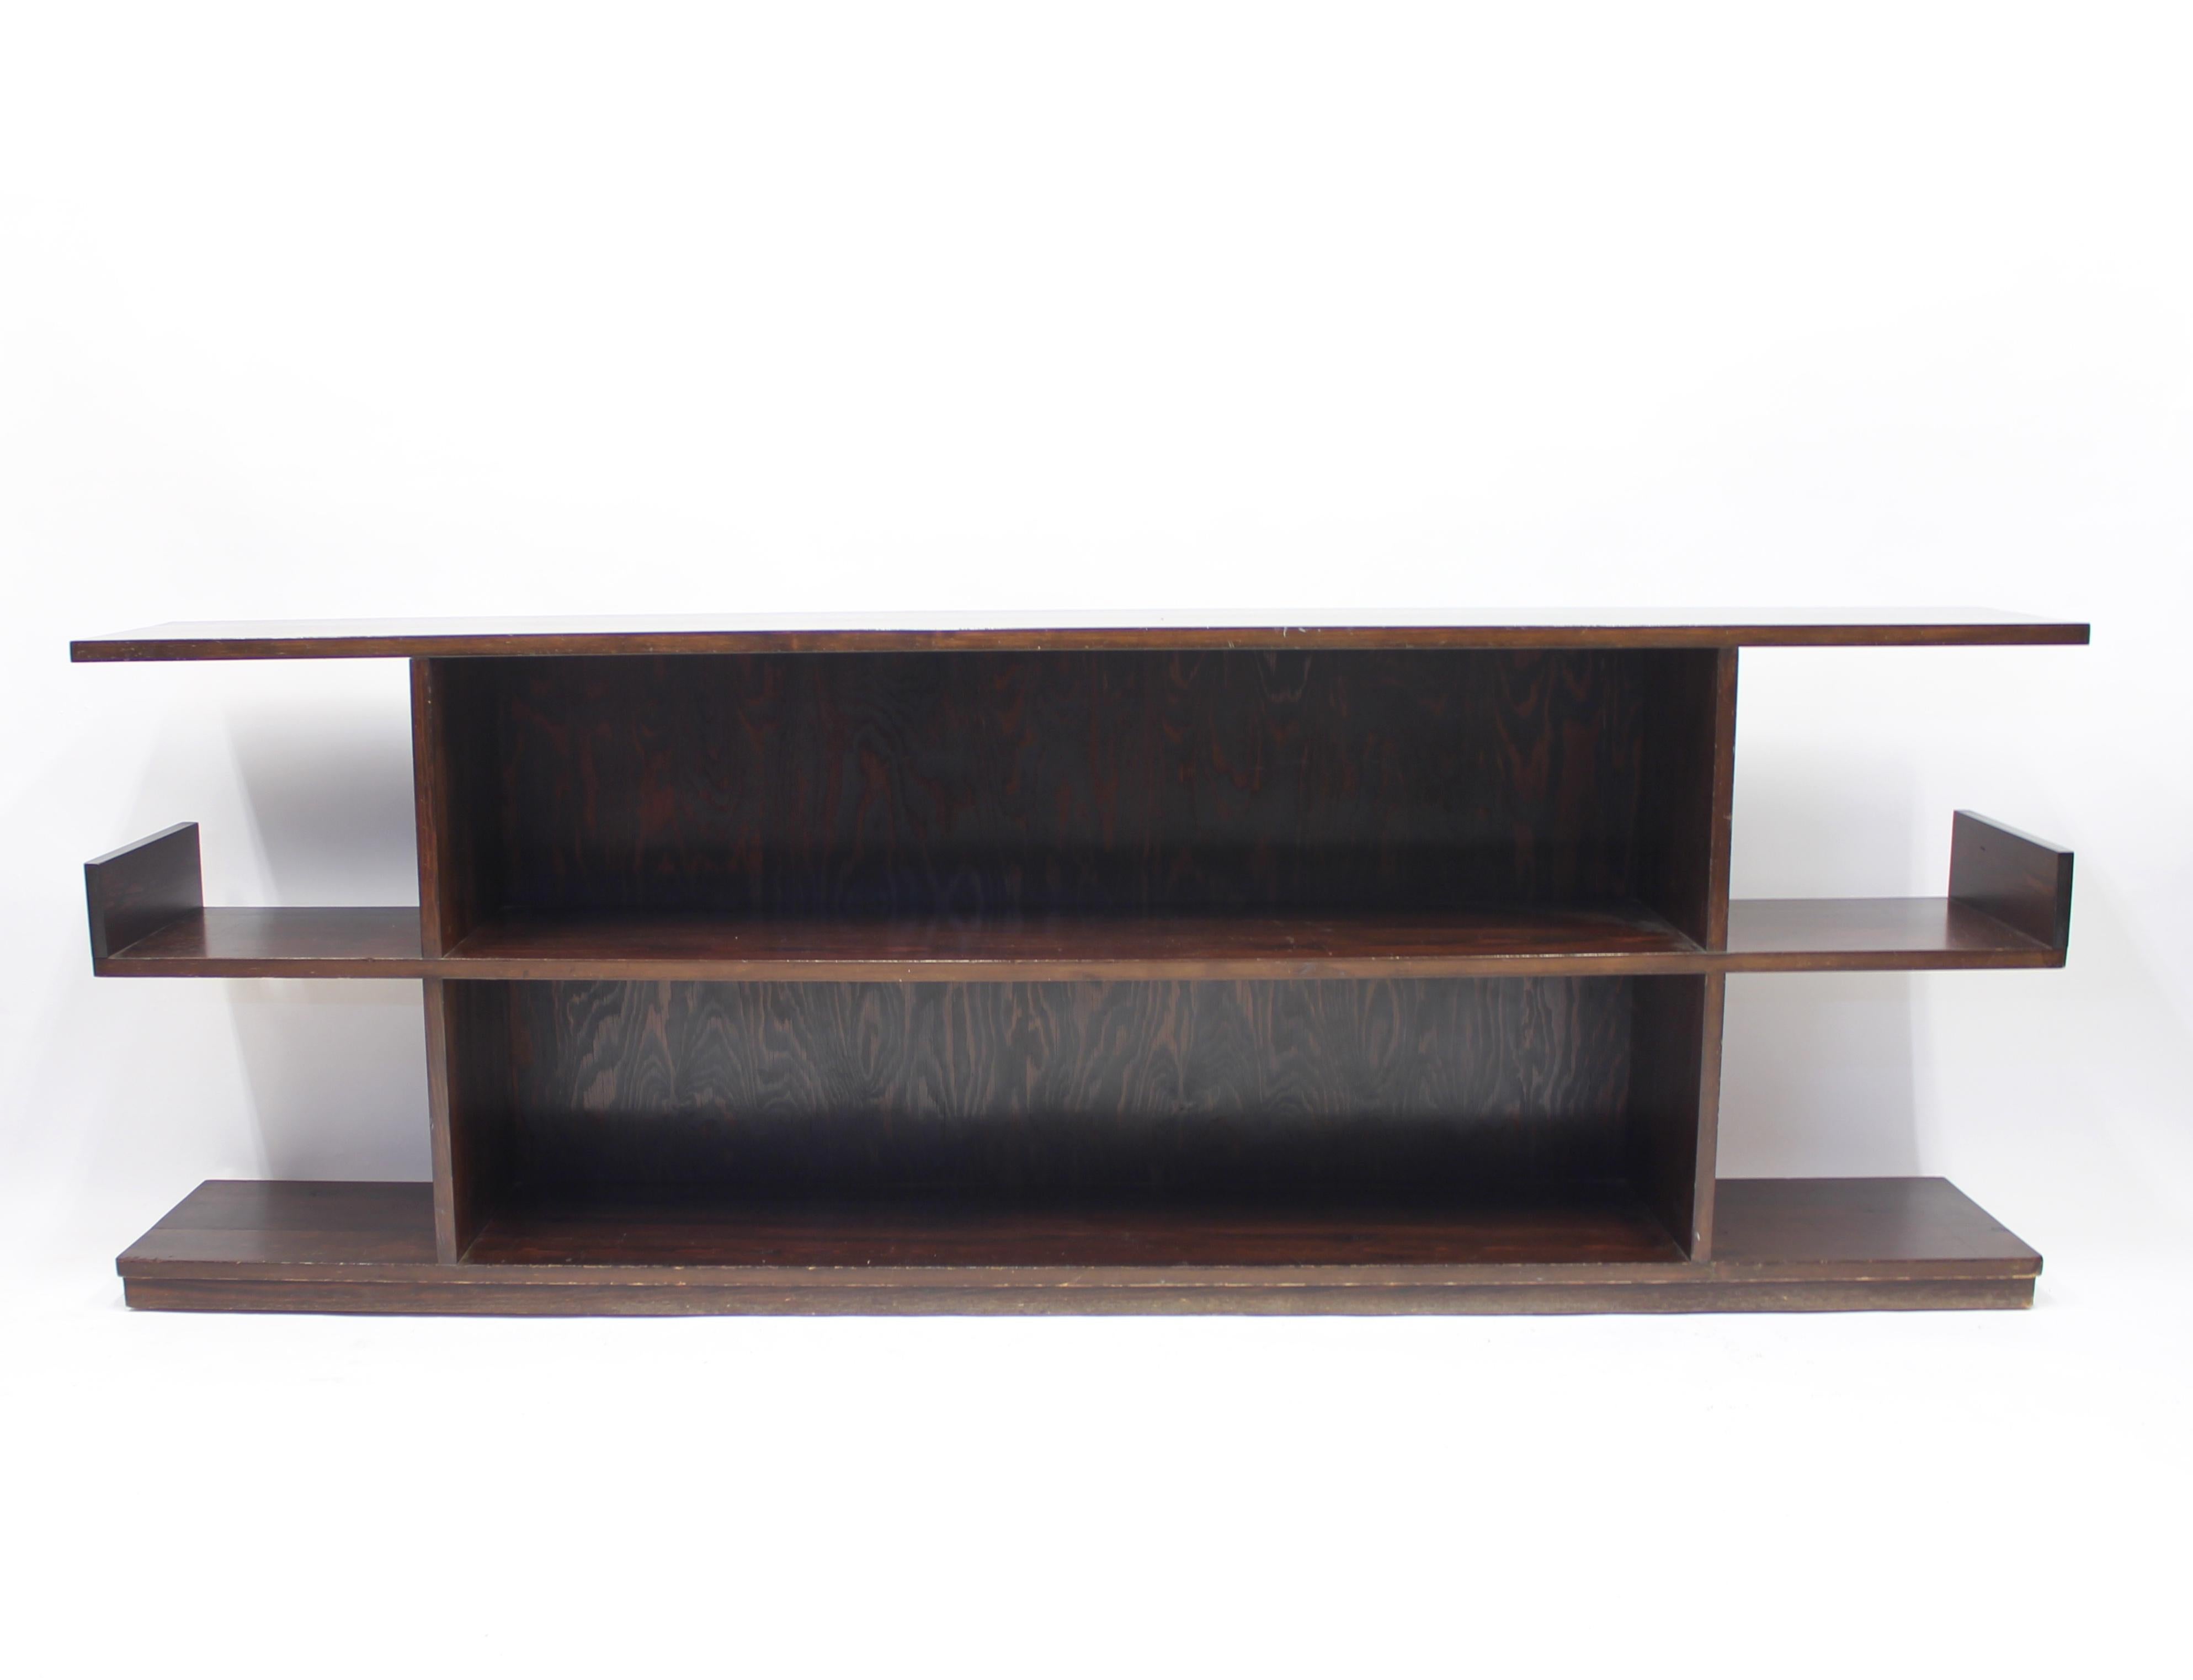 Low Swedish bookshelf/sideboard in stained birch and stained pine attributed to Axel Einar Hjorth, made in the 1930s. Very good vintage condition with light ware.